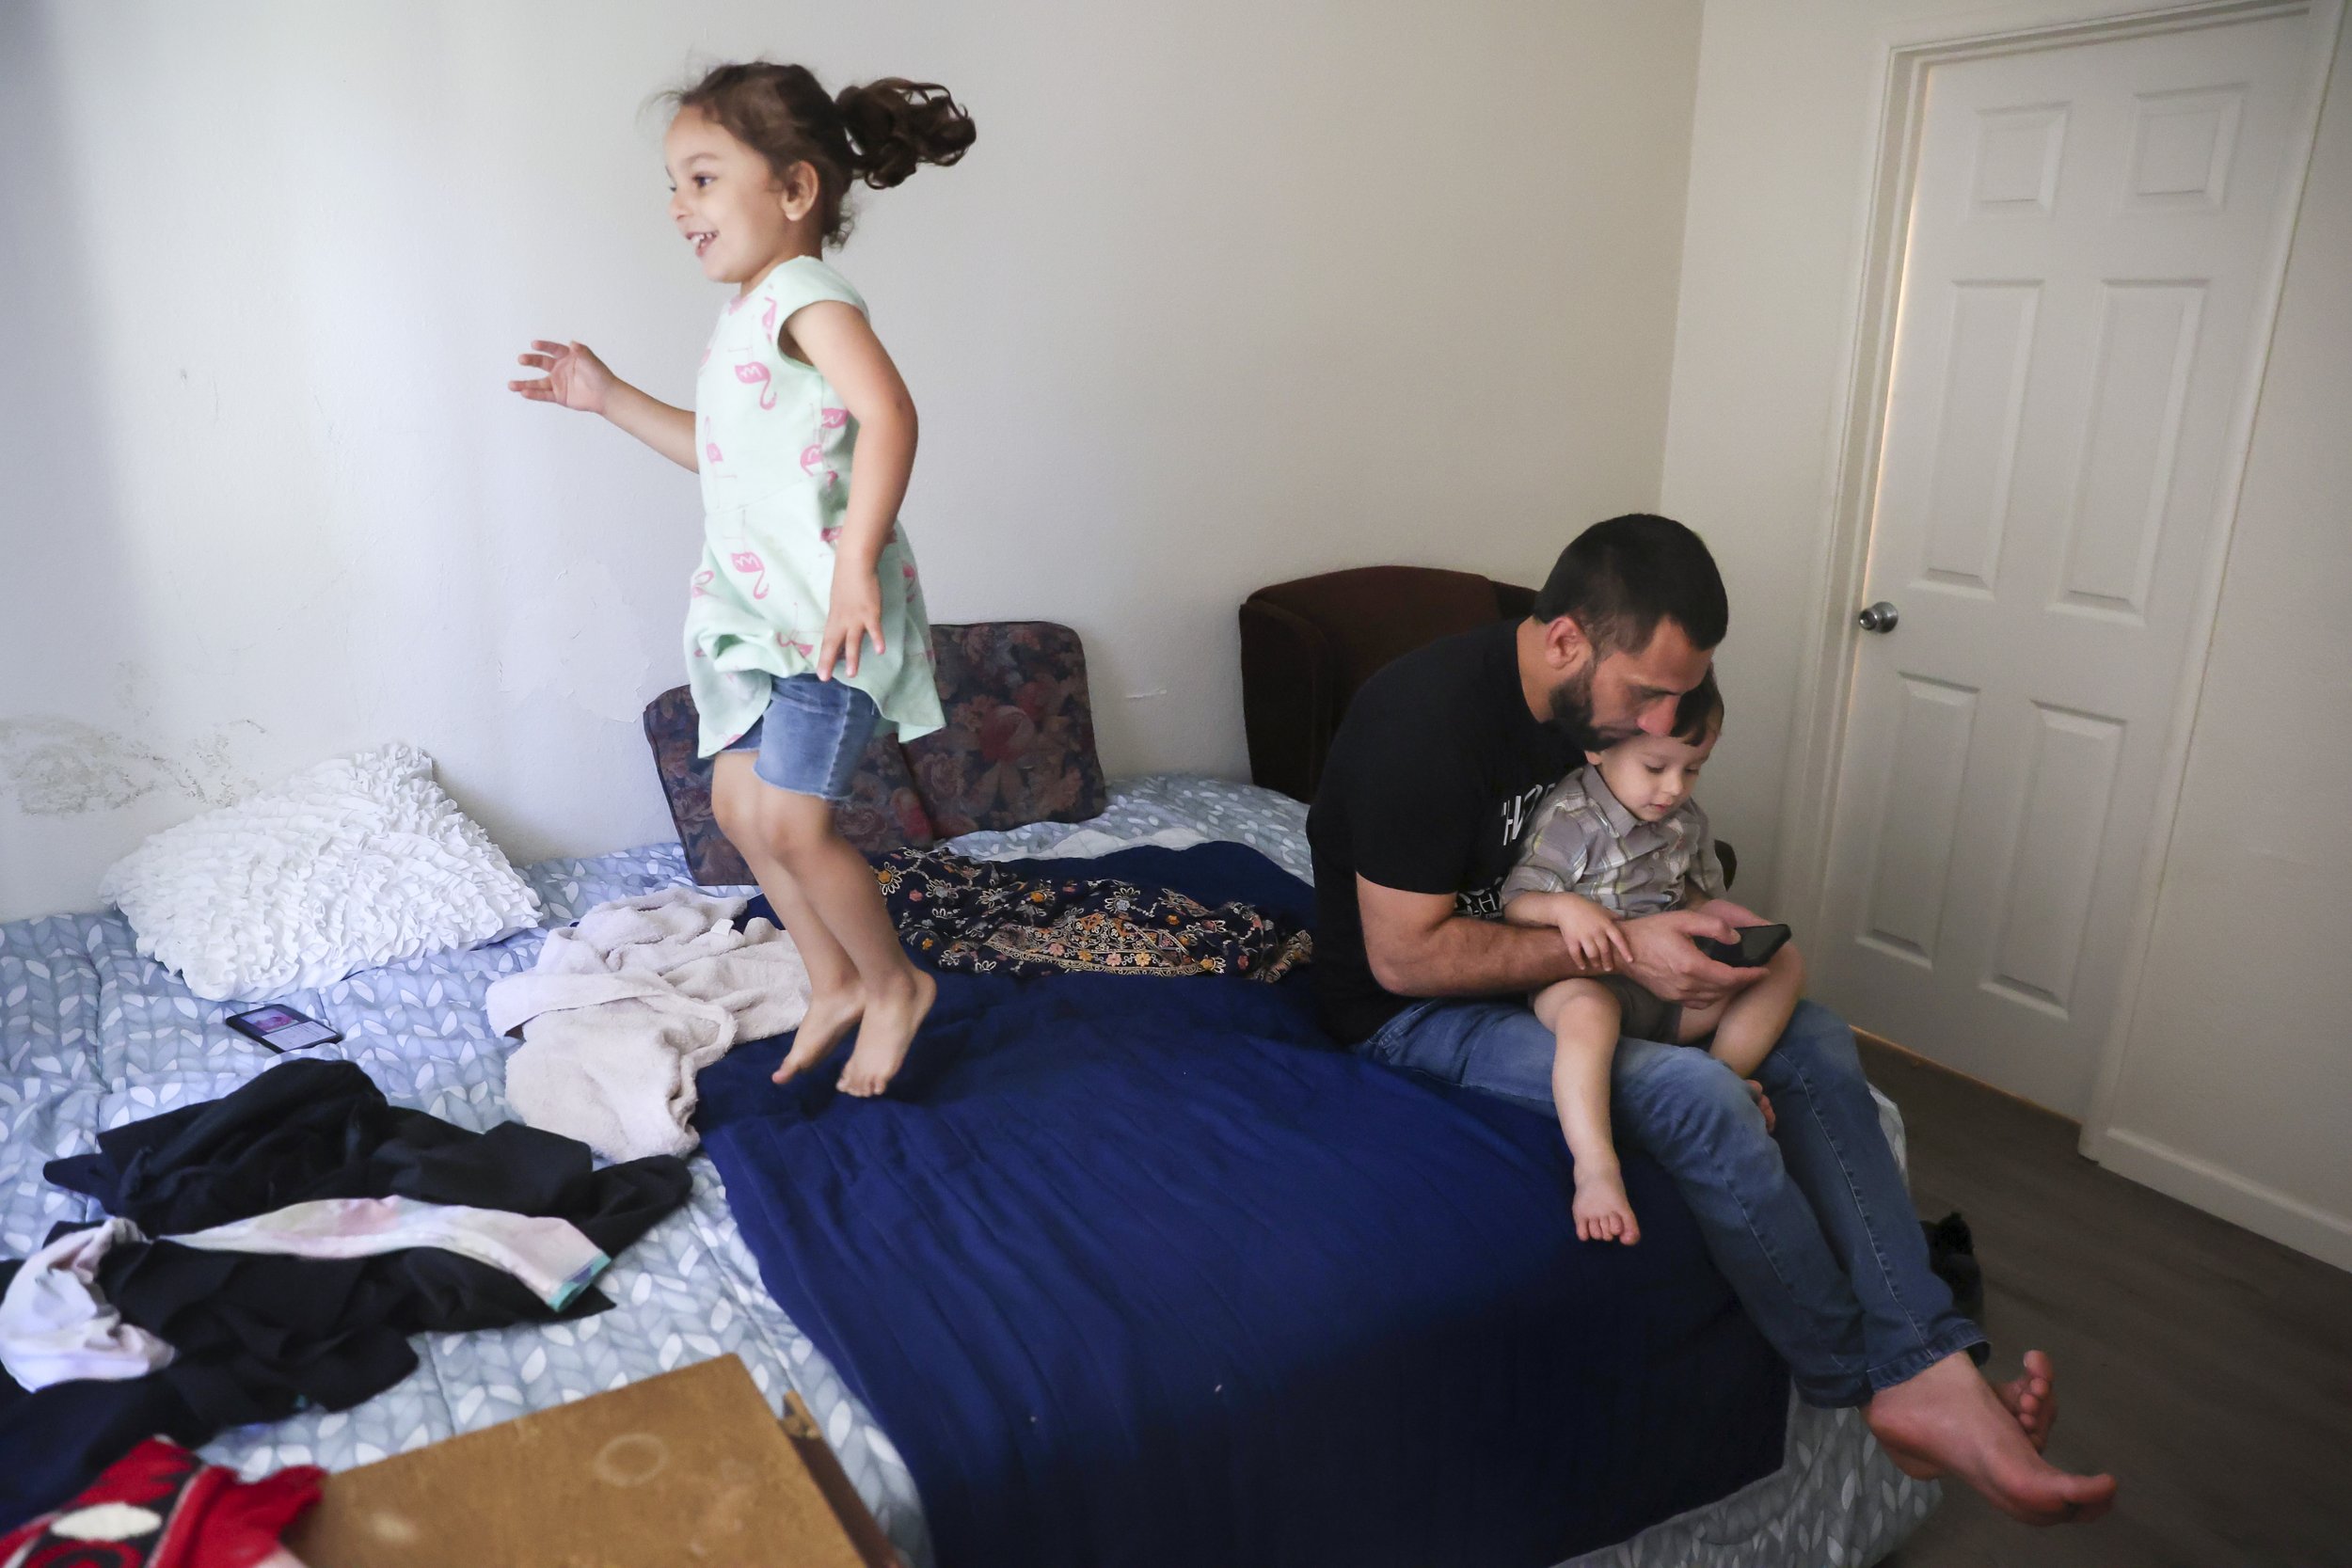  Zahra Mohammadi jumps on her parents bed while Najibullah Mohammadi watches videos with his son at their home in Sacramento, Calif. on Tuesday, May 31, 2022. Najibullah Mohammadi, his wife Susan, their two young children Zahra and Yasar, and their s